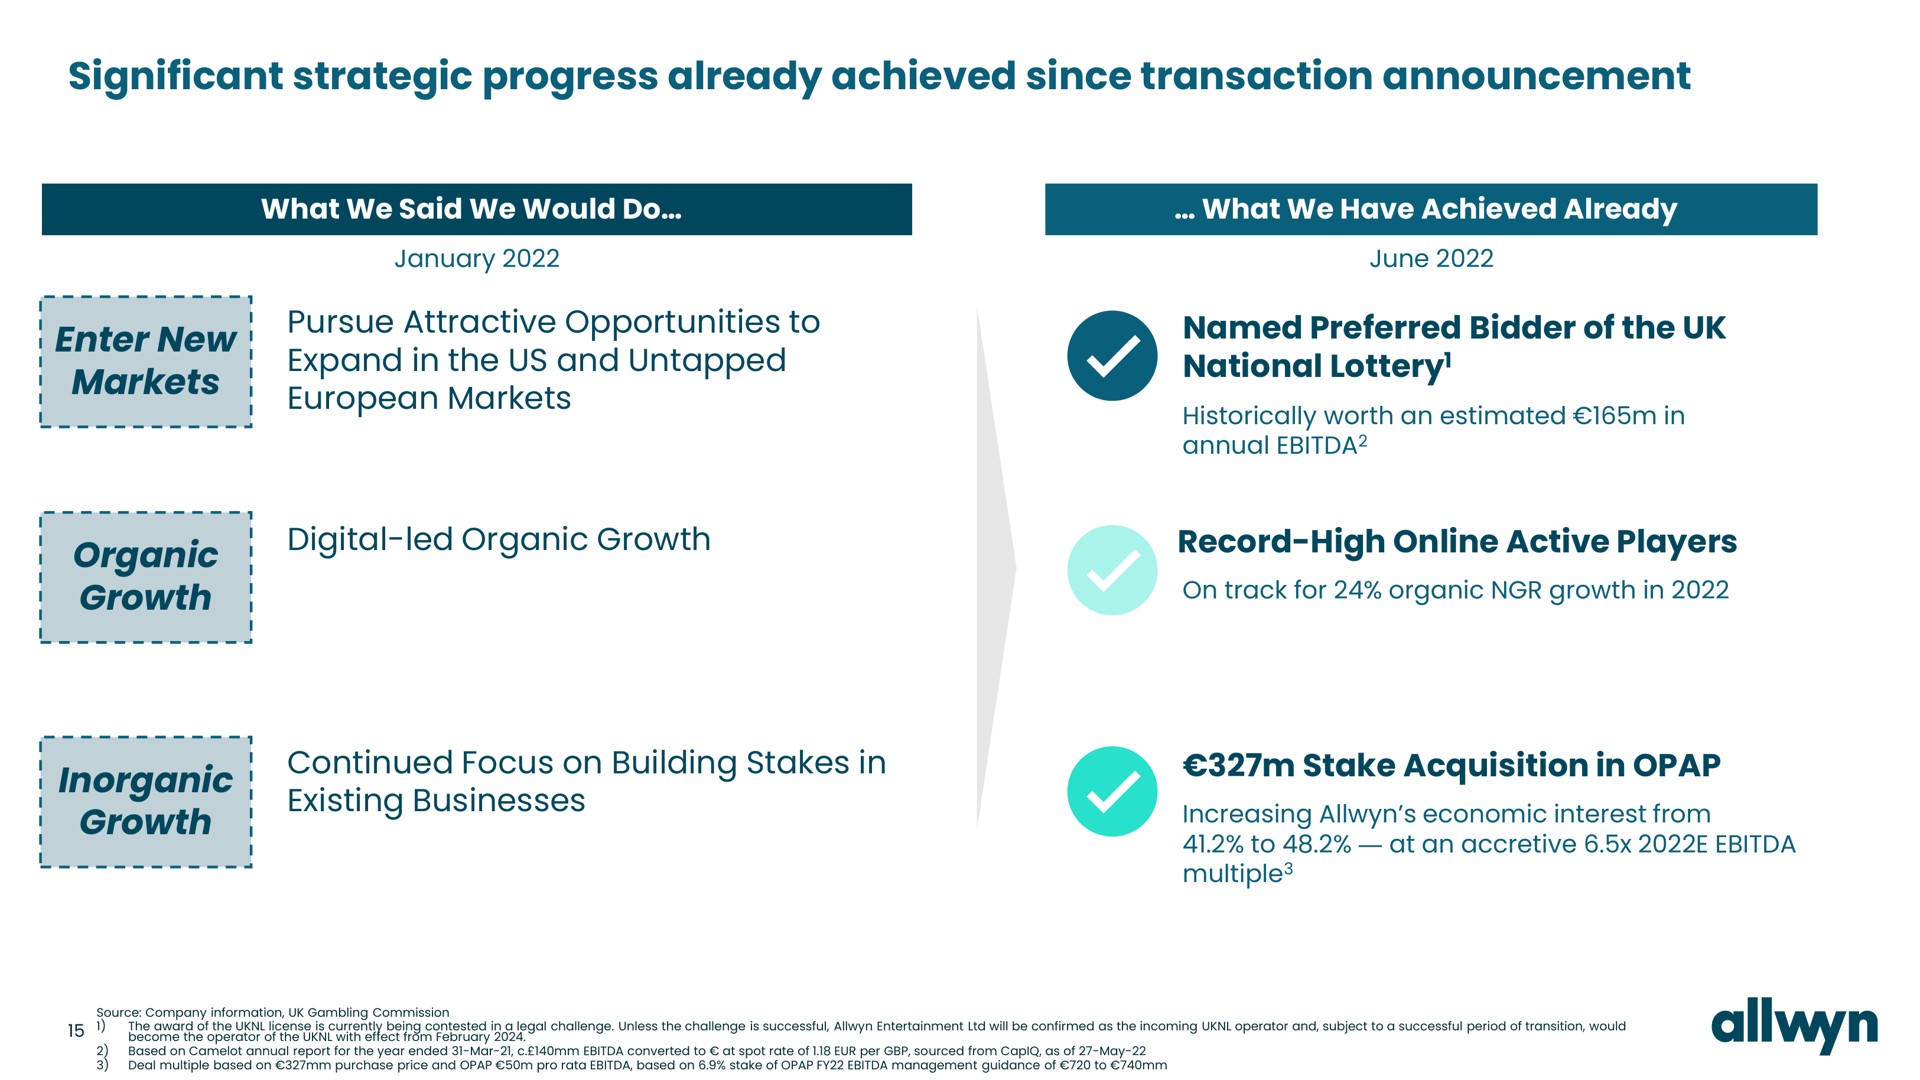 significant strategic progress already achieved since transaction announcement enter new markets pursue attractive opportunities to expand in the us and untapped markets digital led organic growth organic growth named preferred bidder of the national lottery record high active players inorganic growth continued focus on building stakes in existing businesses stake acquisition in led | Allwyn